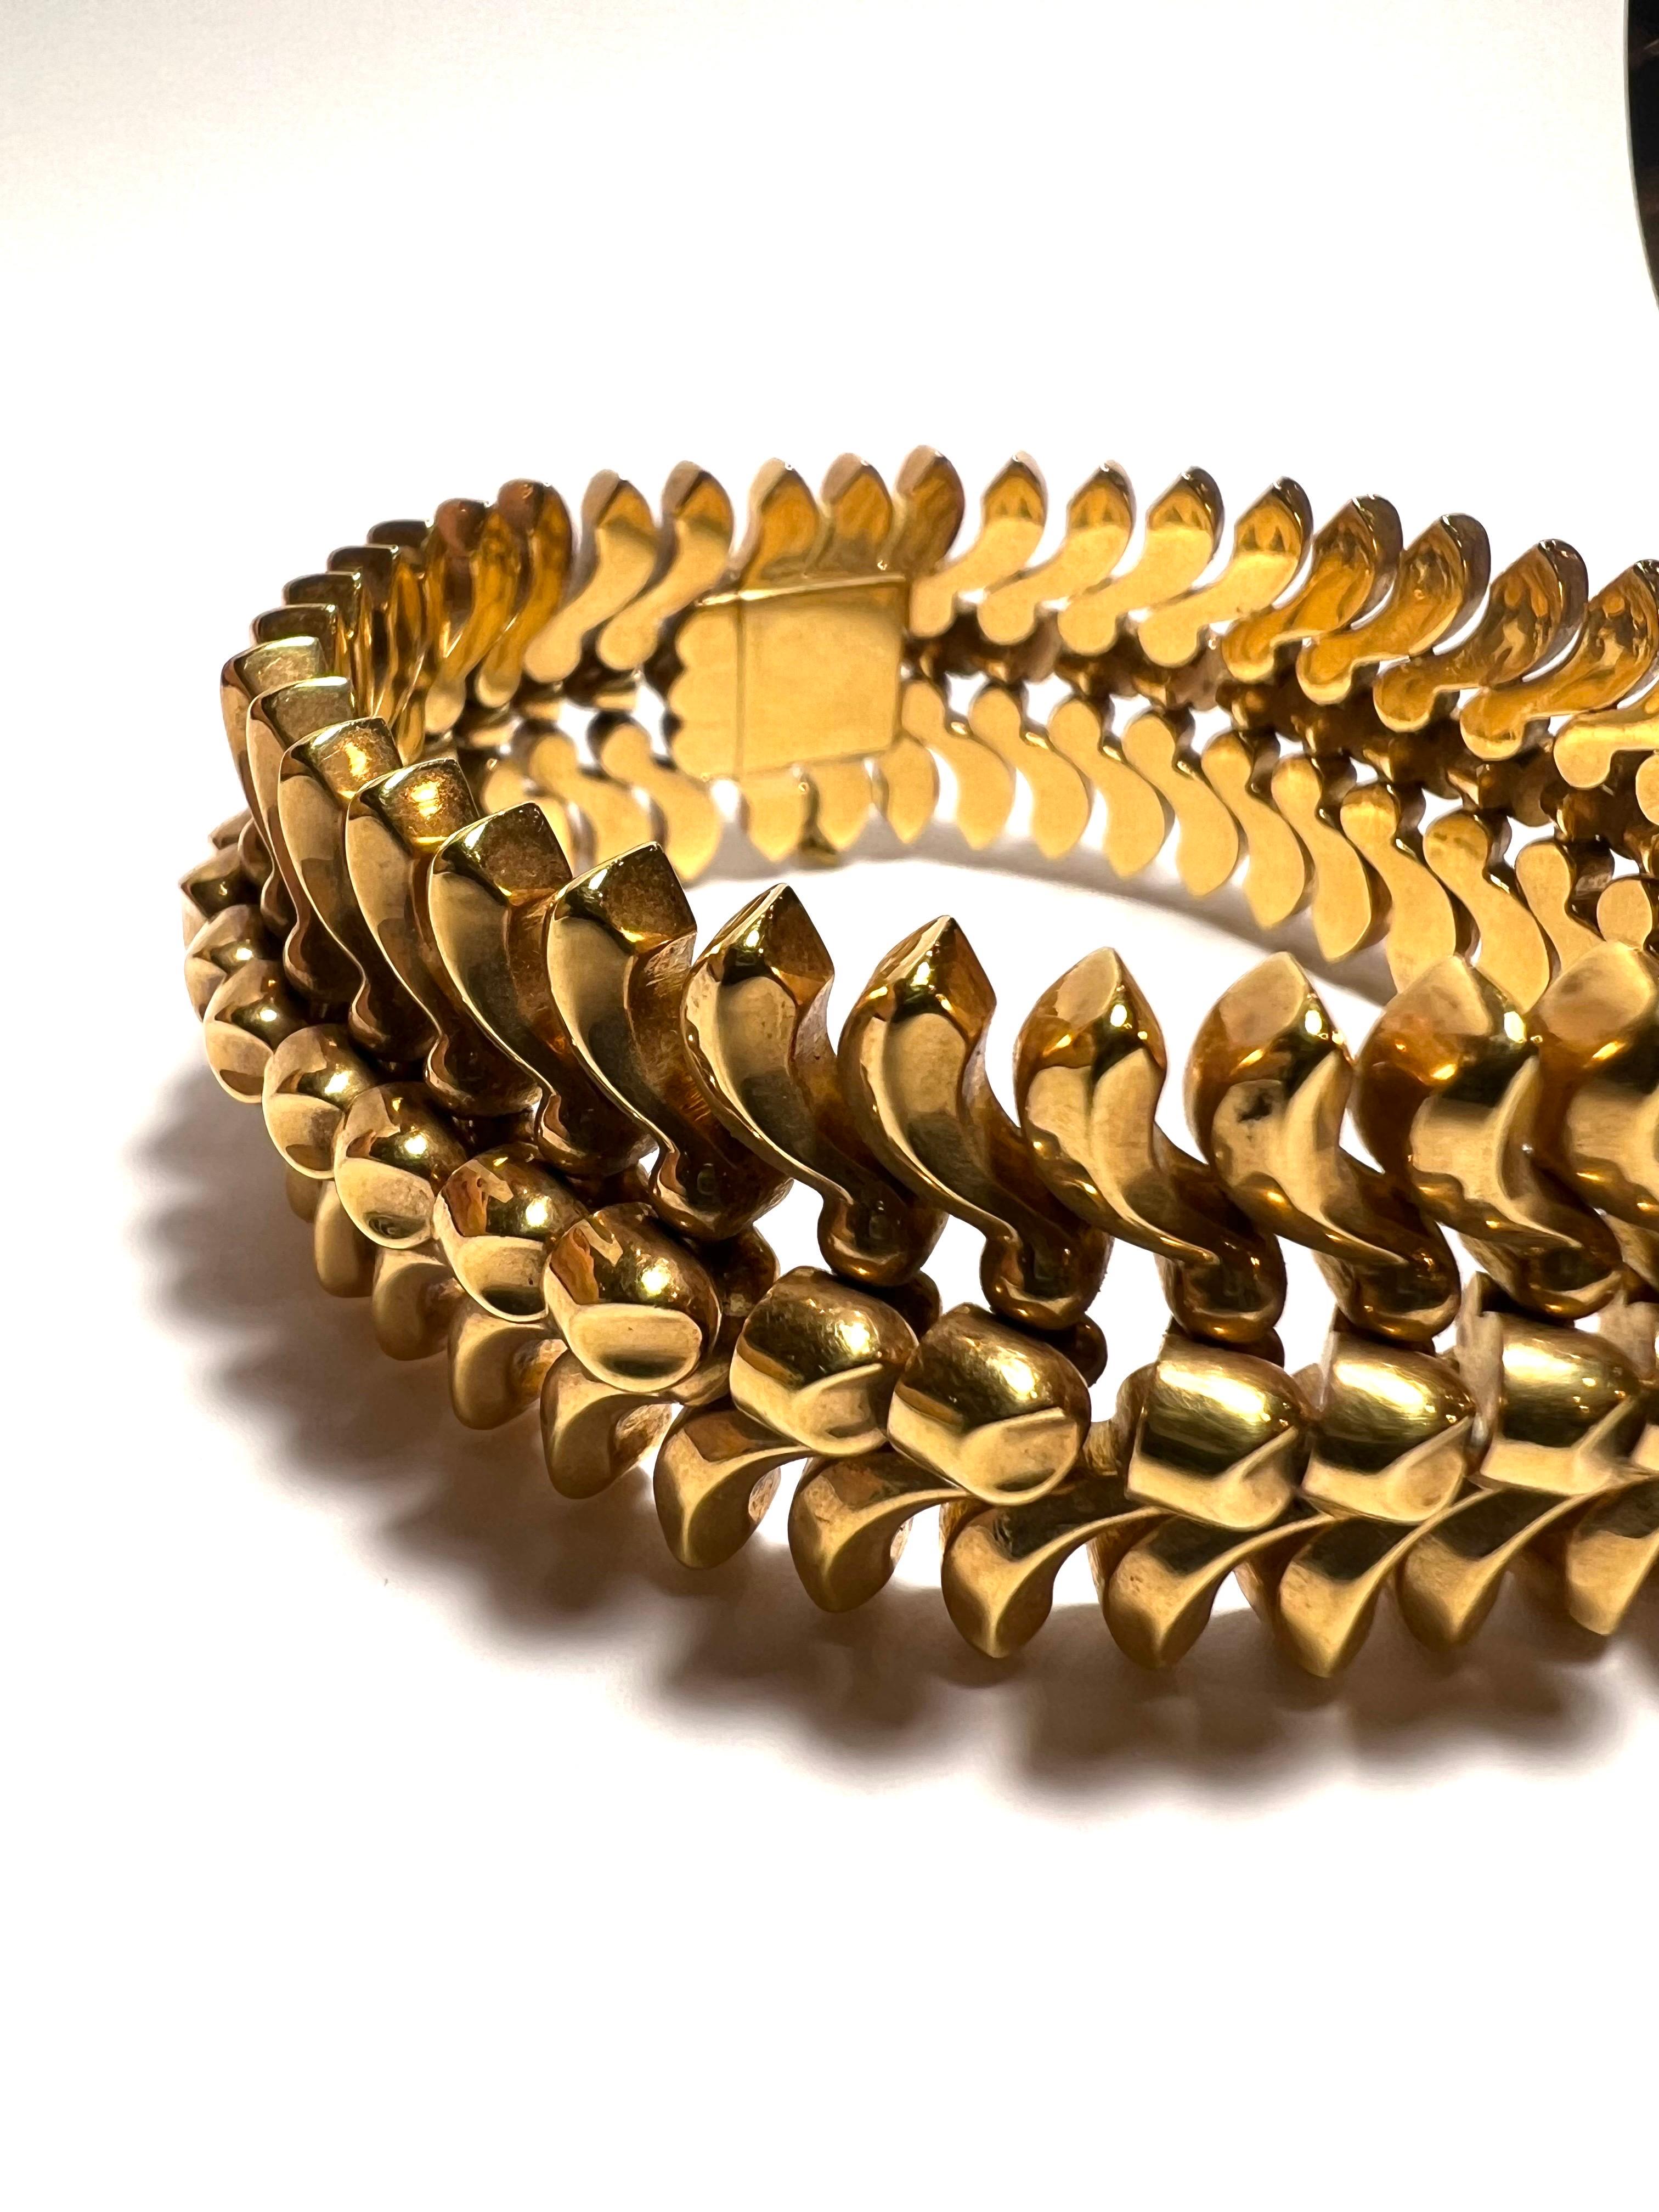 Magnificent 18k Yellow Gold Retro Tank Bracelet.
Circa 1940.
Articulated, flexible.
With security chain in the clasp.
Condition: Very Good.
Authentic retro jewel - European work of the 1940s.

Length: 19 cm  Width: 2.6 cm. Weight:  86.5